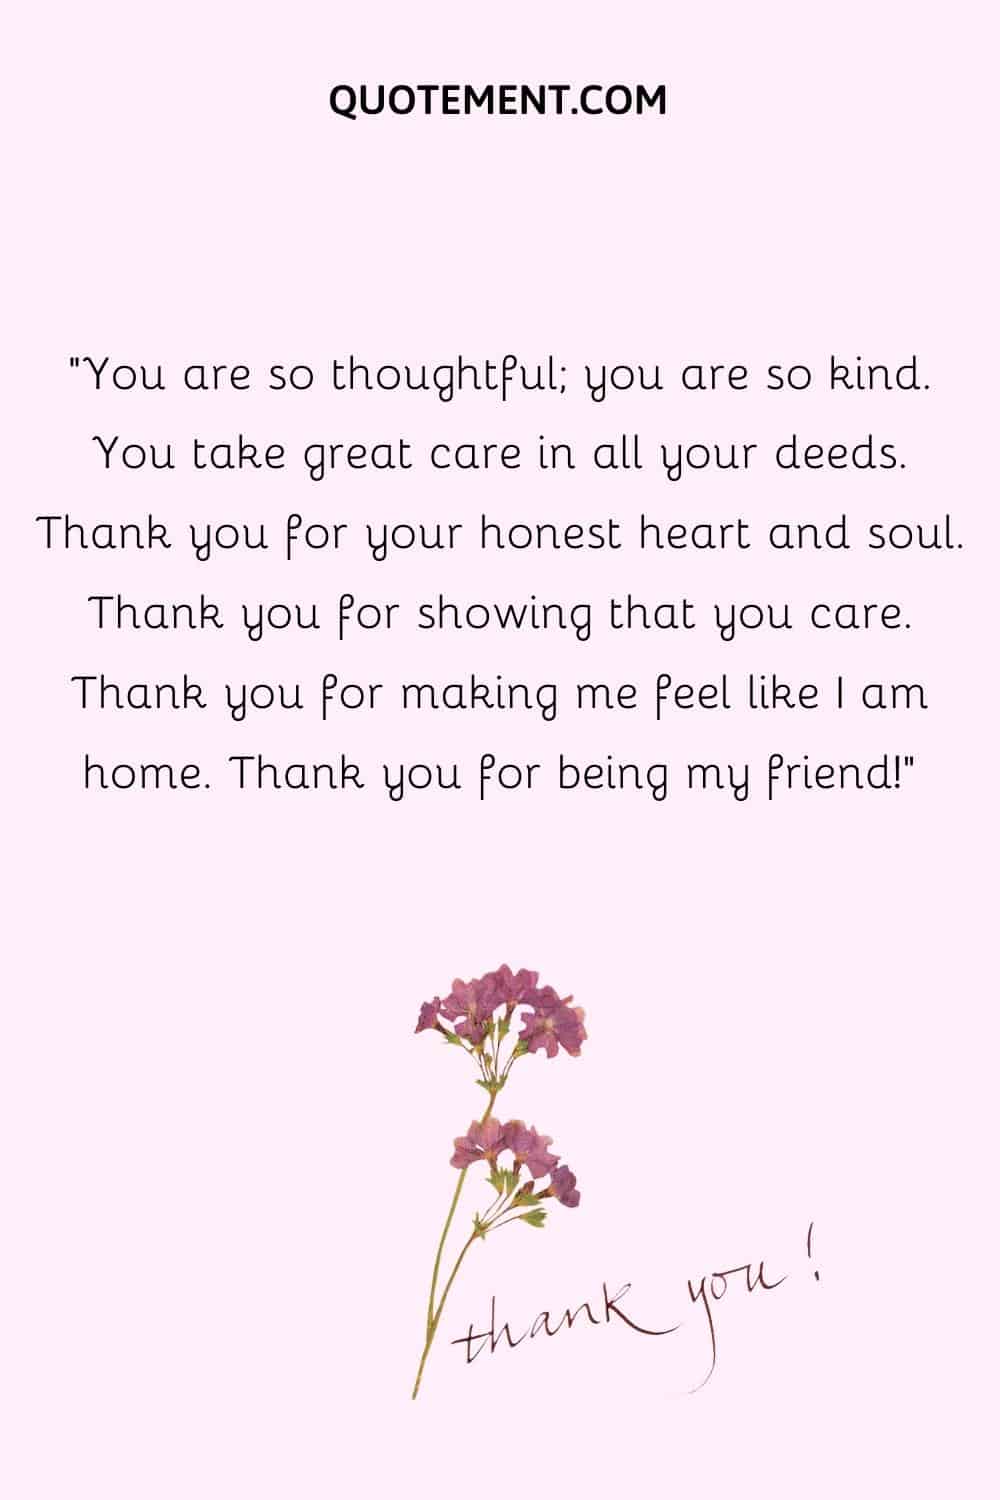 You are so thoughtful; you are so kind. You take great care in all your deeds.